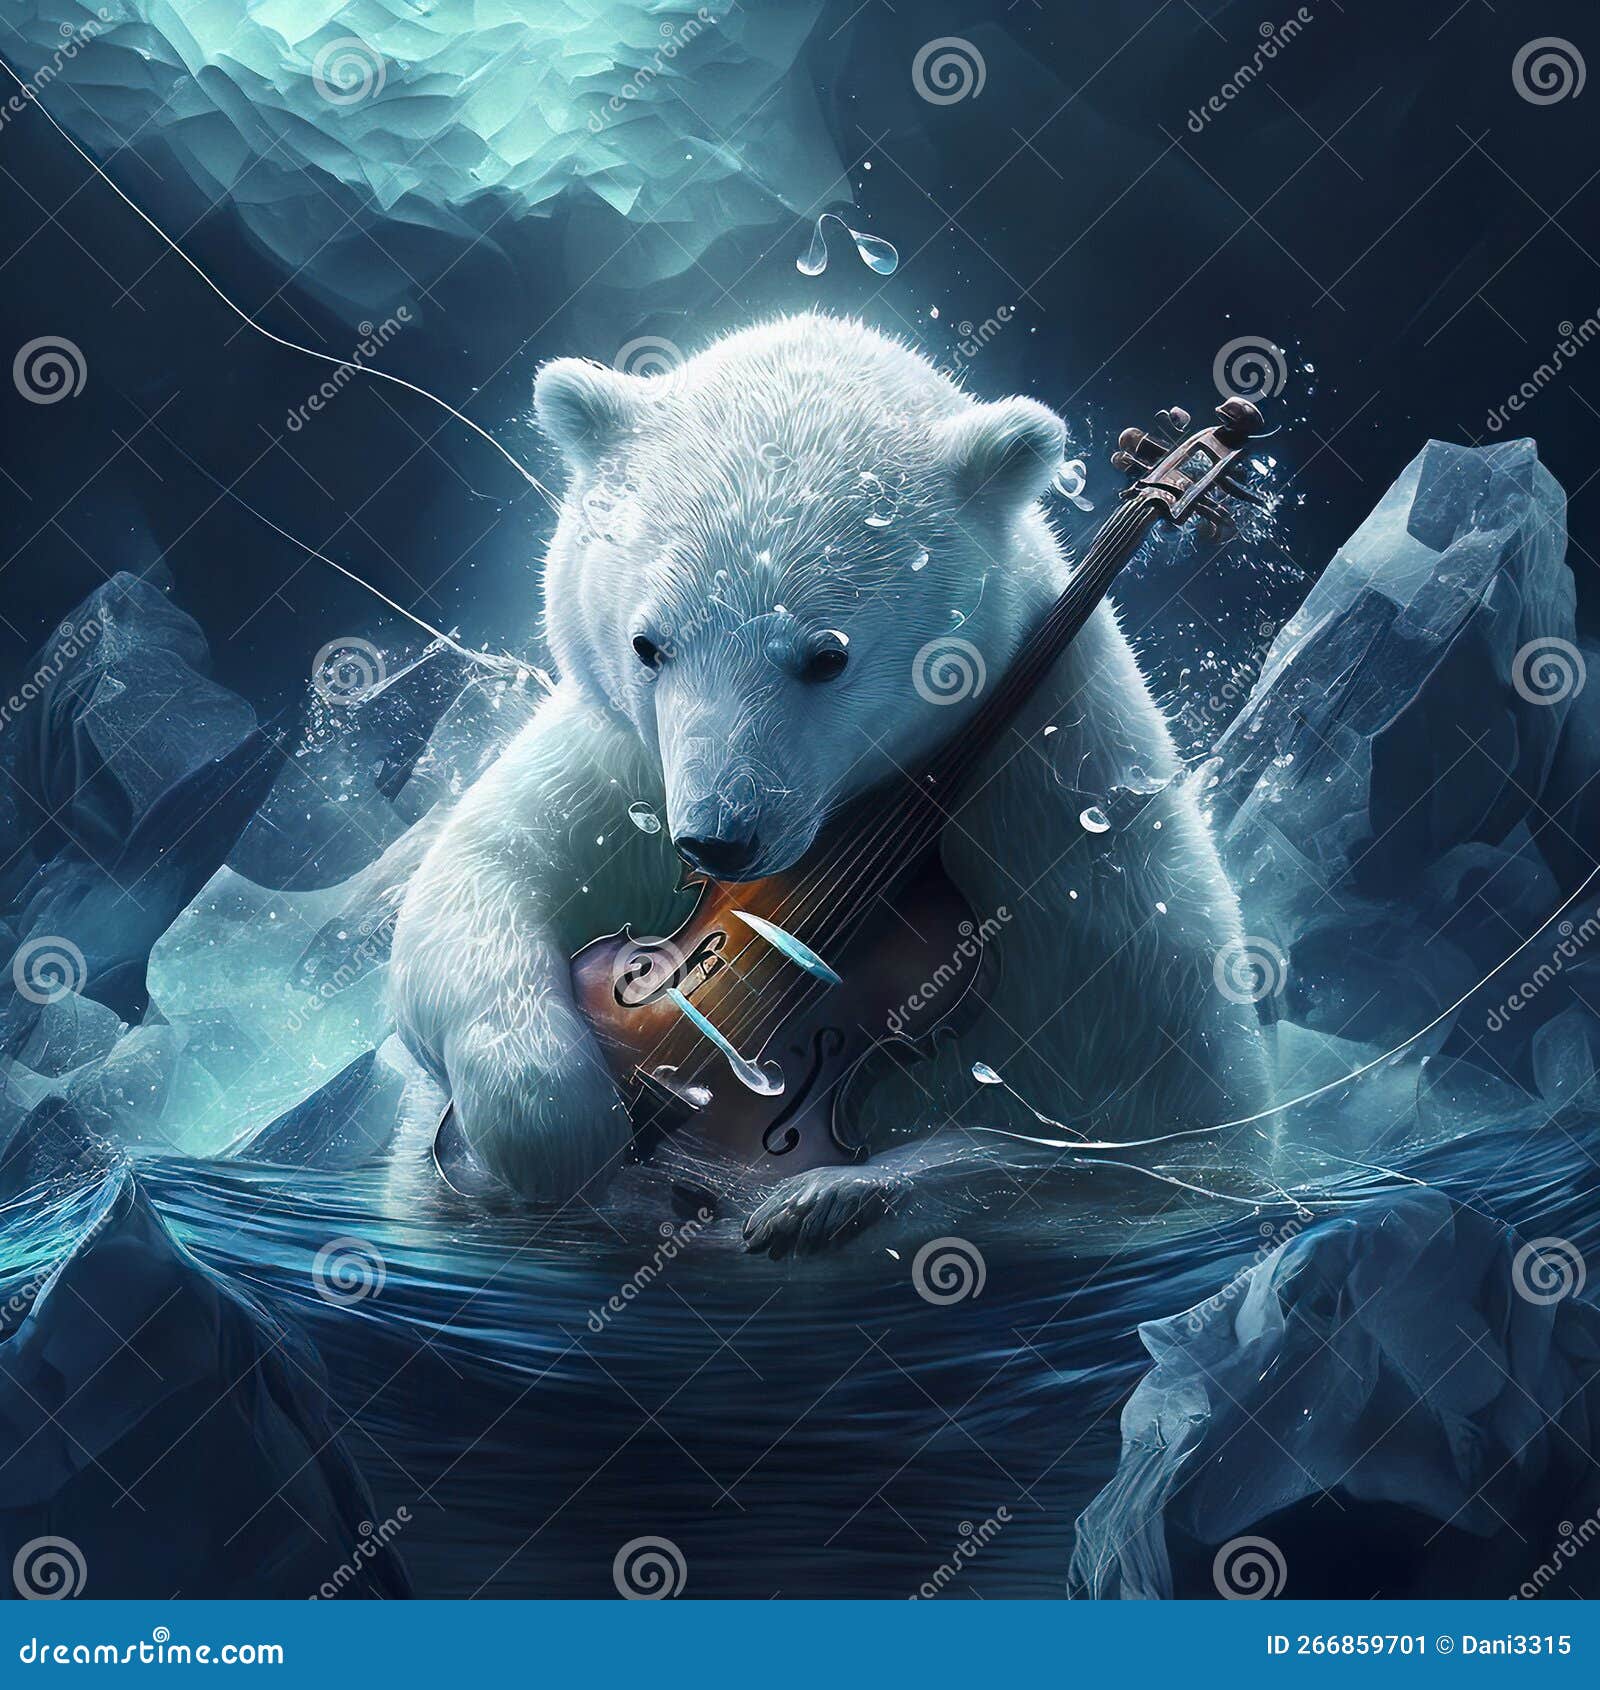 Fantasy Art Background With A Polar Bear Playing A Violin In The Water Inside An Ice Cave Stock